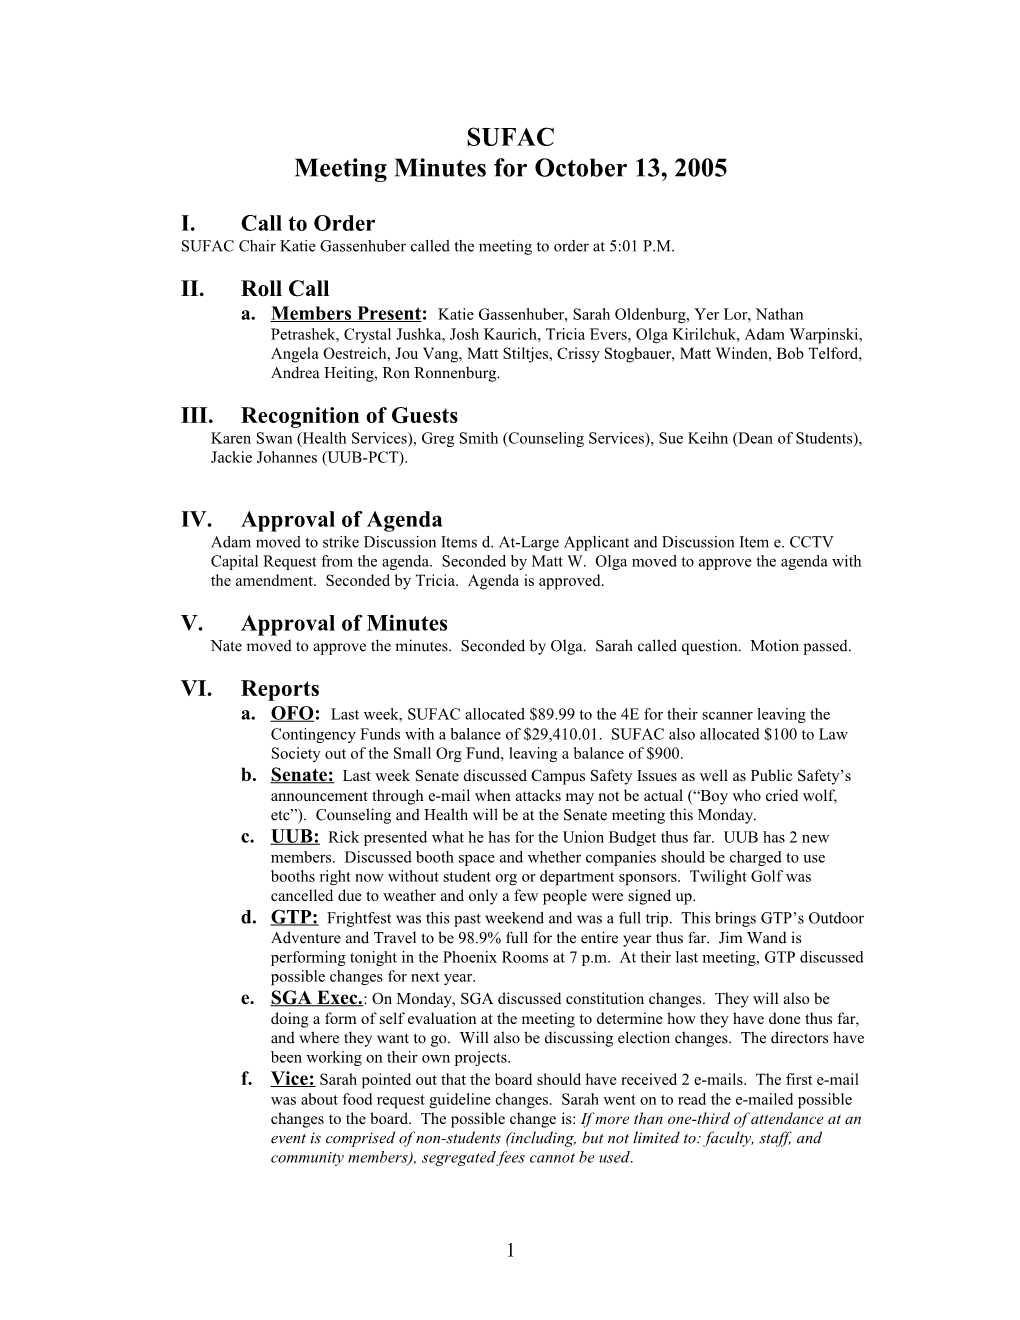 Meeting Minutes for October 13, 2005